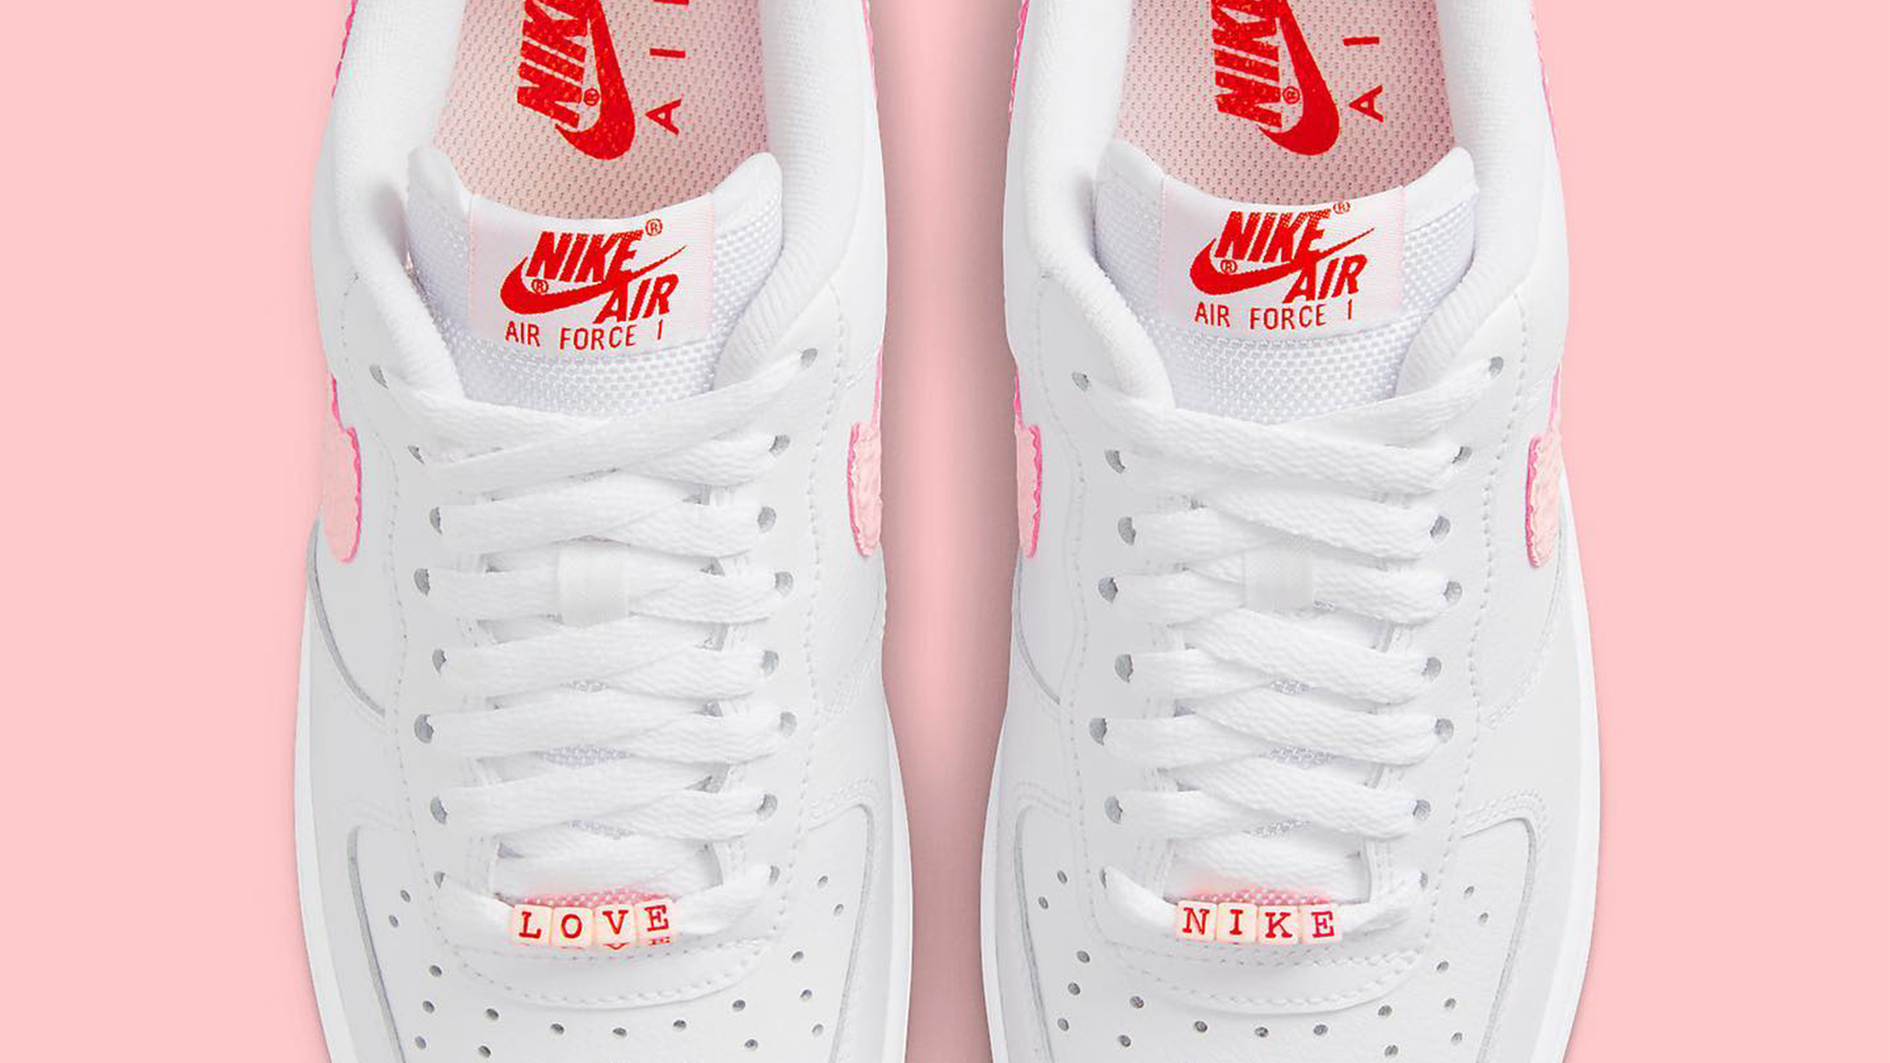 The Nike Air Force 1 "Valentine's Day" 2022 is Dropping Soon! The